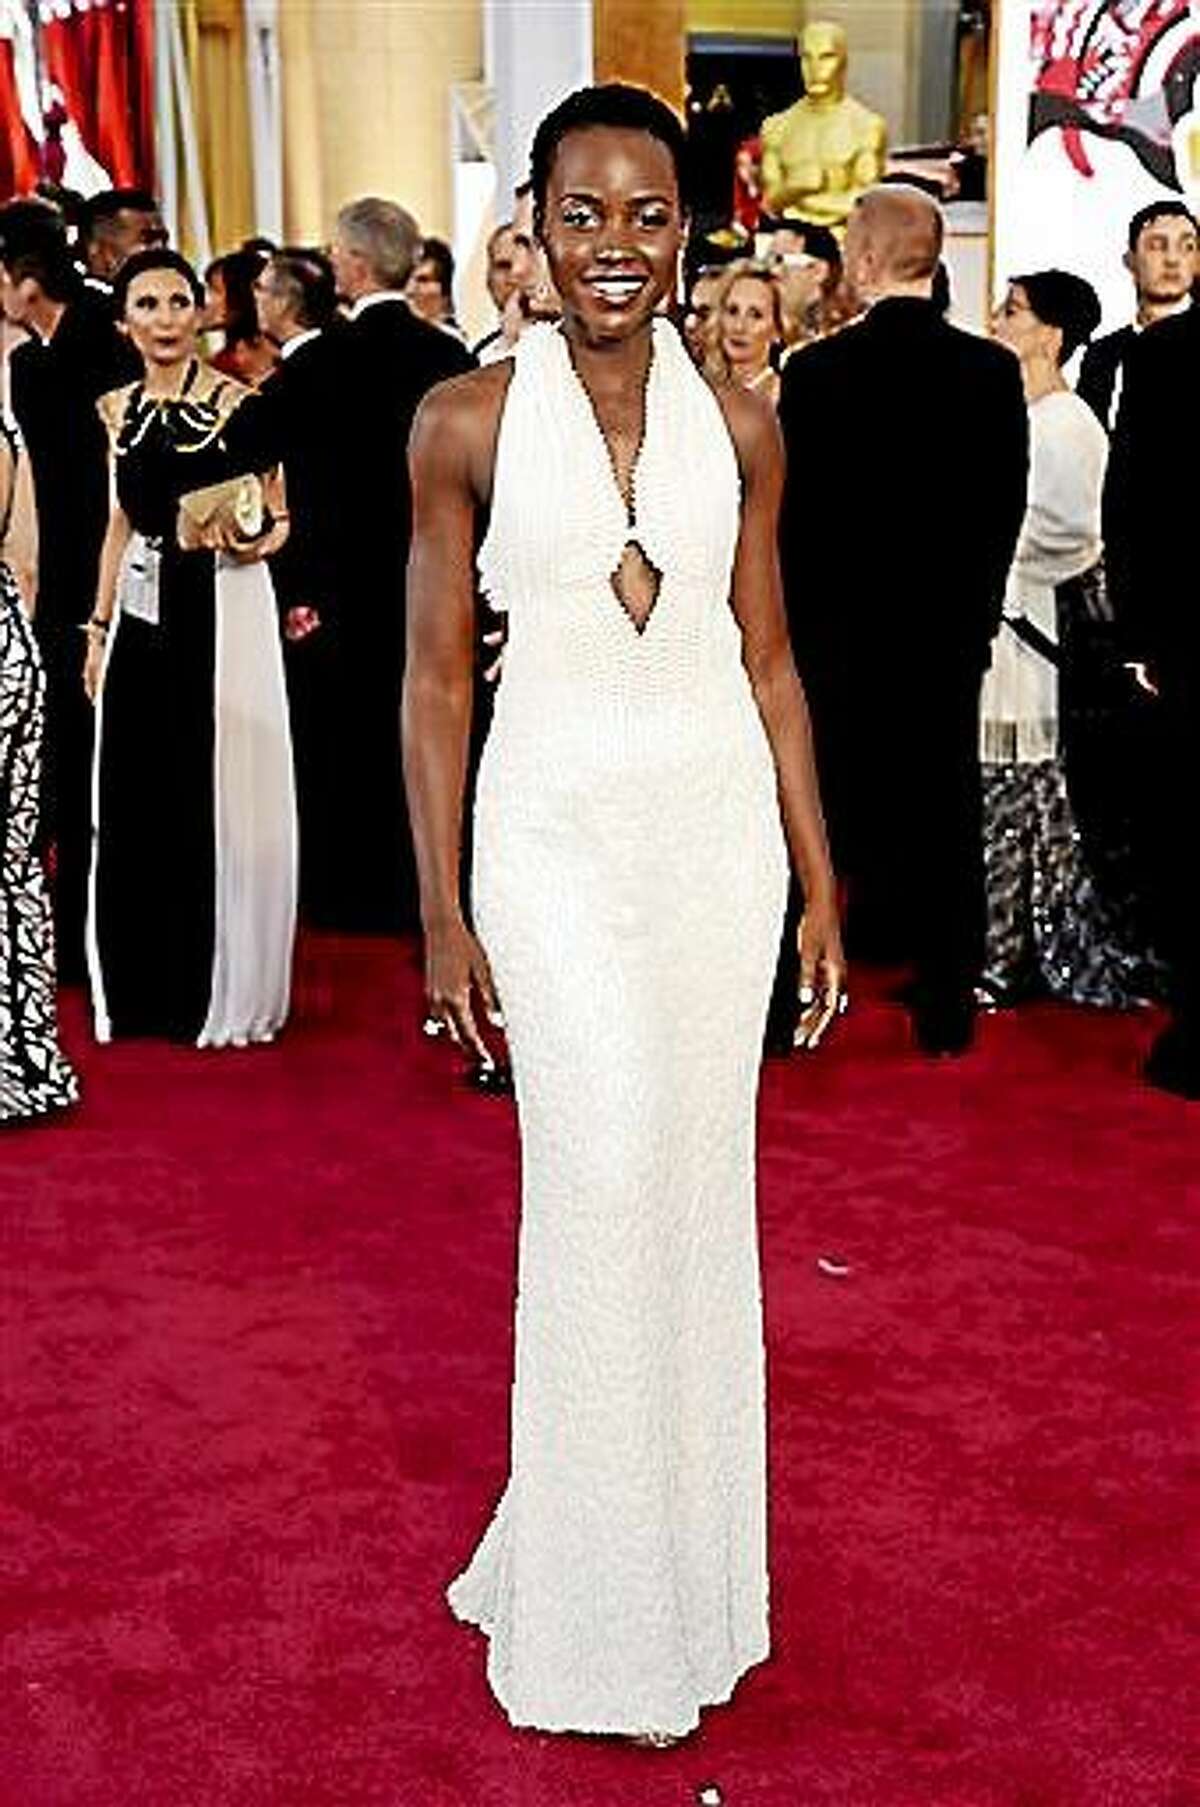 FILE - In this Feb. 22, 2015 file photo, actress Lupita Nyong'o arrives at the Oscars wearing a dress made of pearls at the Dolby Theatre in Los Angeles. Los Angeles sheriff's detectives are investigating the theft of the $150,000 custom Calvin Klein dress worn by Nyong'o at the 2015 Academy Awards. The dress was reported stolen from Nyong'o's West Hollywood hotel room late on Wednesday Feb. 25, 2015. (Photo by Chris Pizzello/Invision/AP, File)